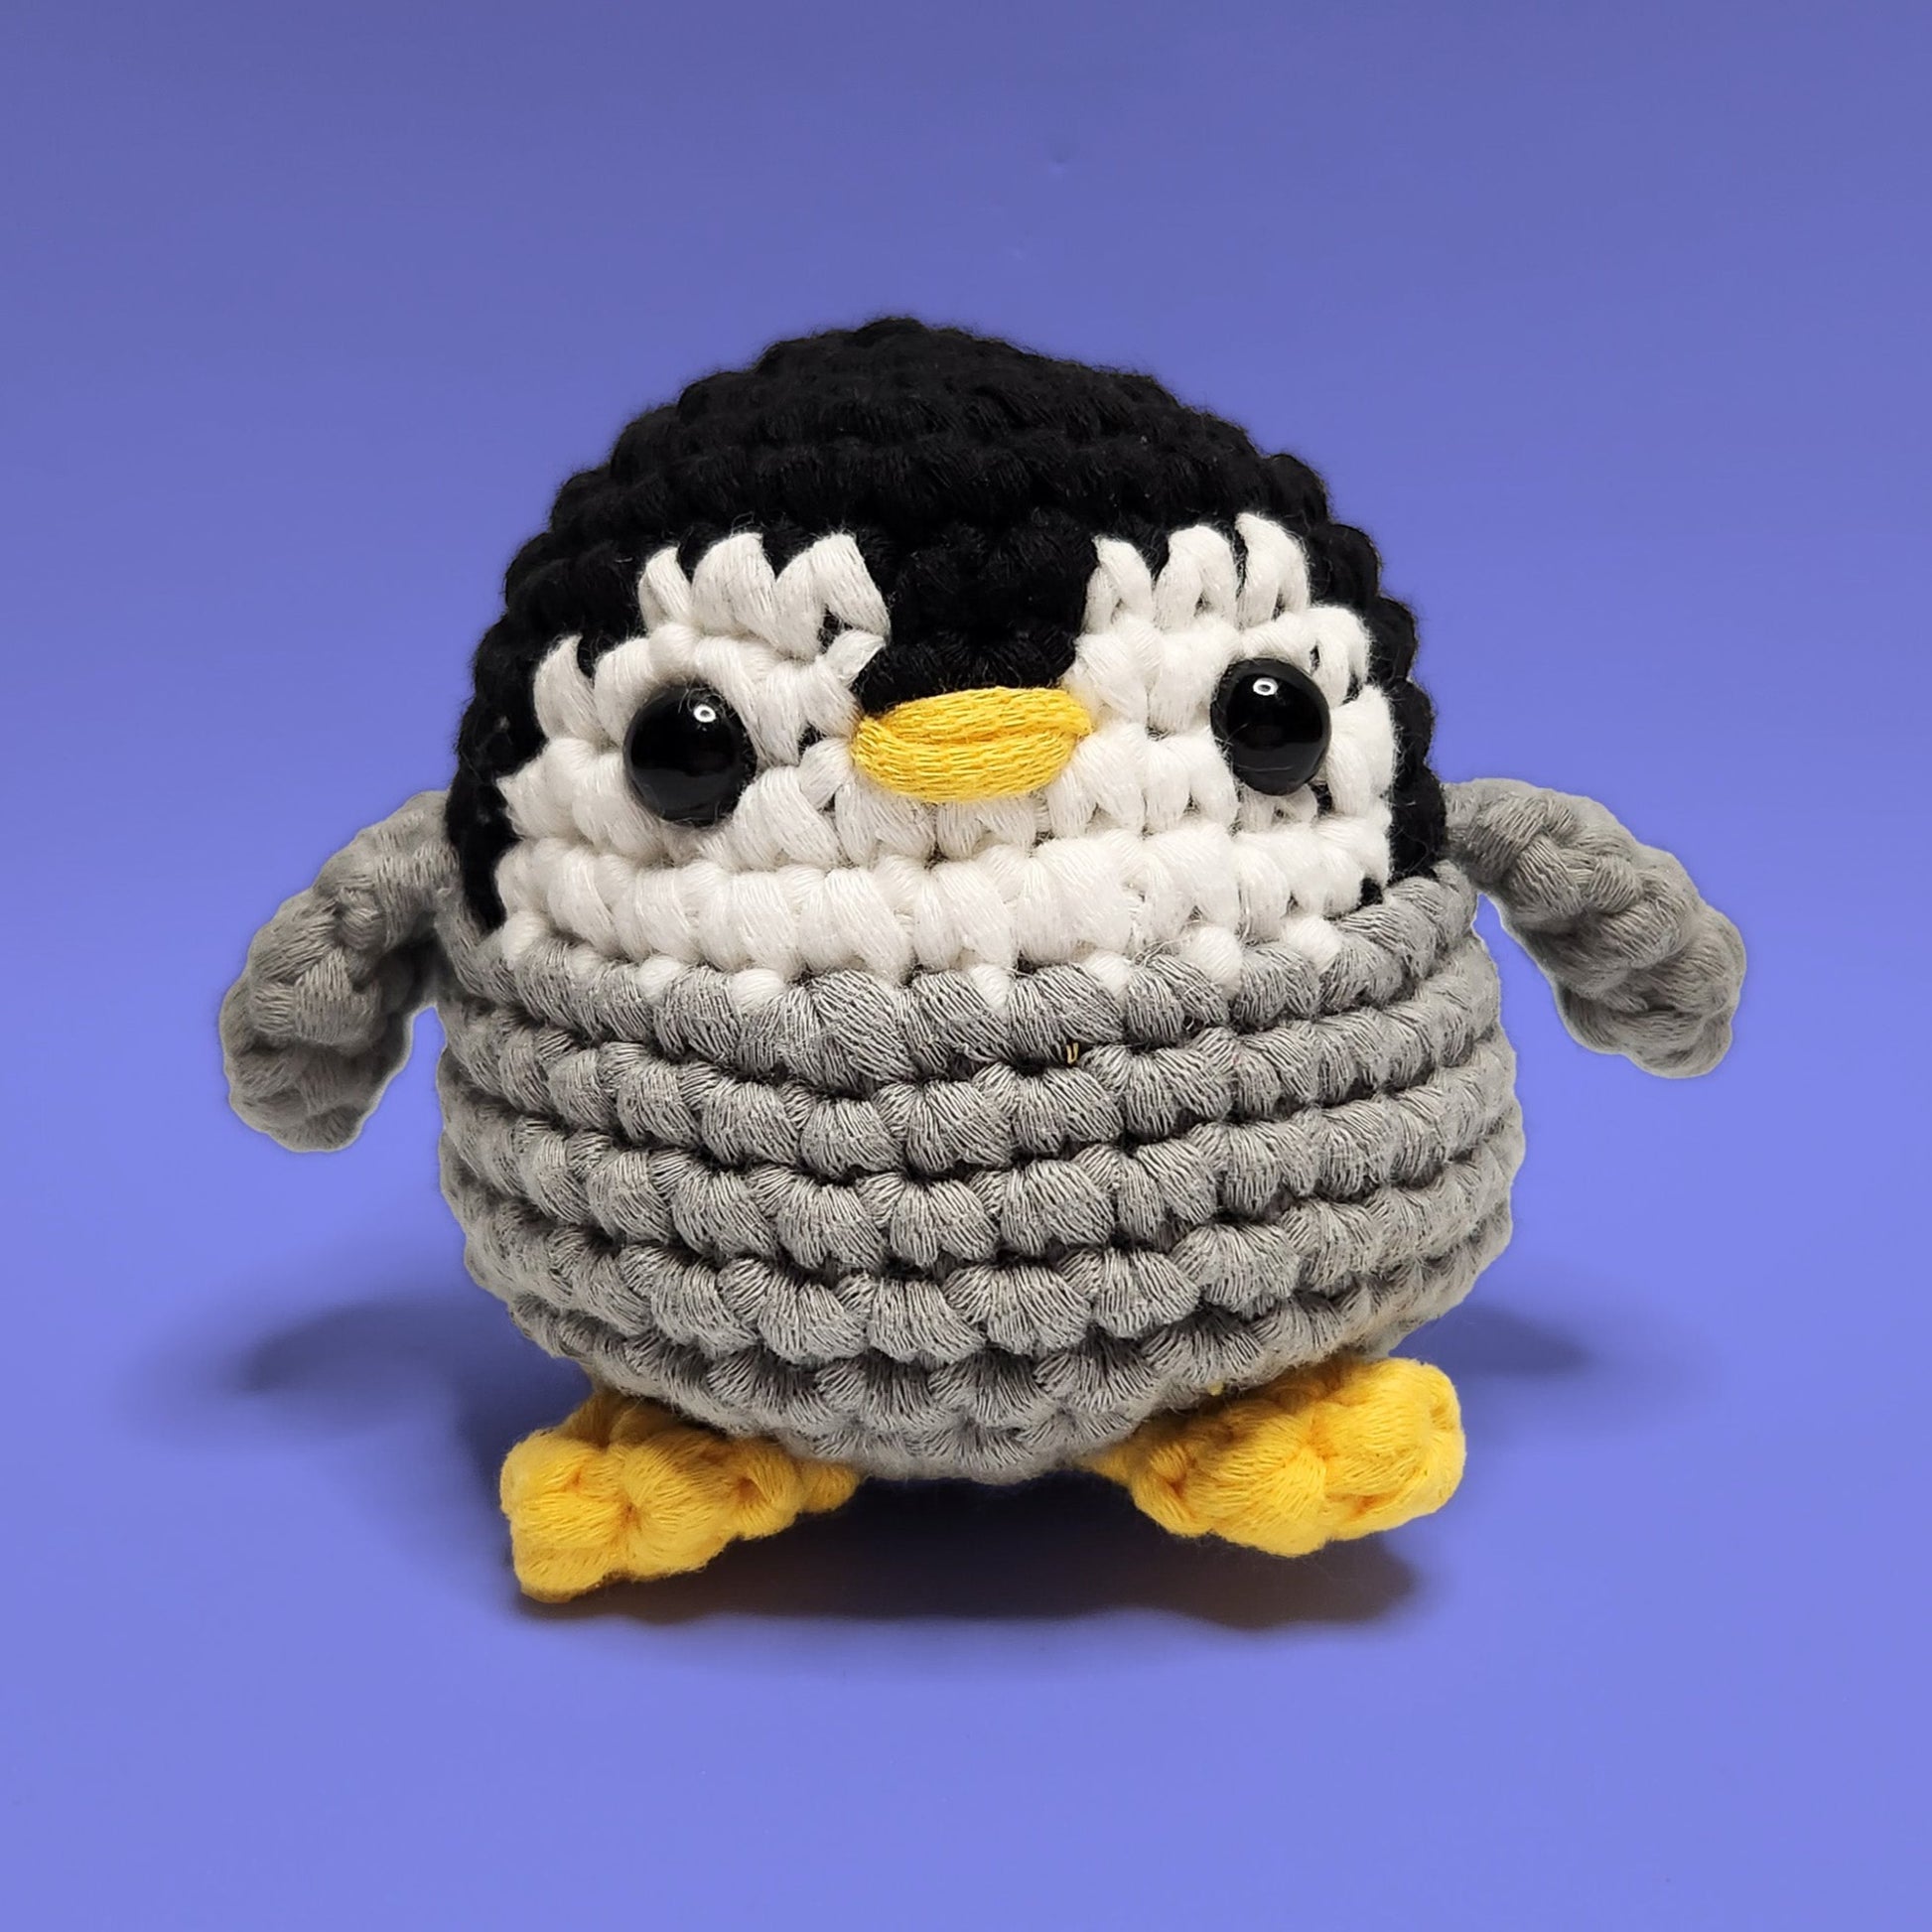 Lola the black, grey and white penguin crochet amigurumi, handmade with love. This adorable penguin with yellow legs is perfect for bringing joy and cheer. Front view, ideal for crochet enthusiasts and penguin lovers.